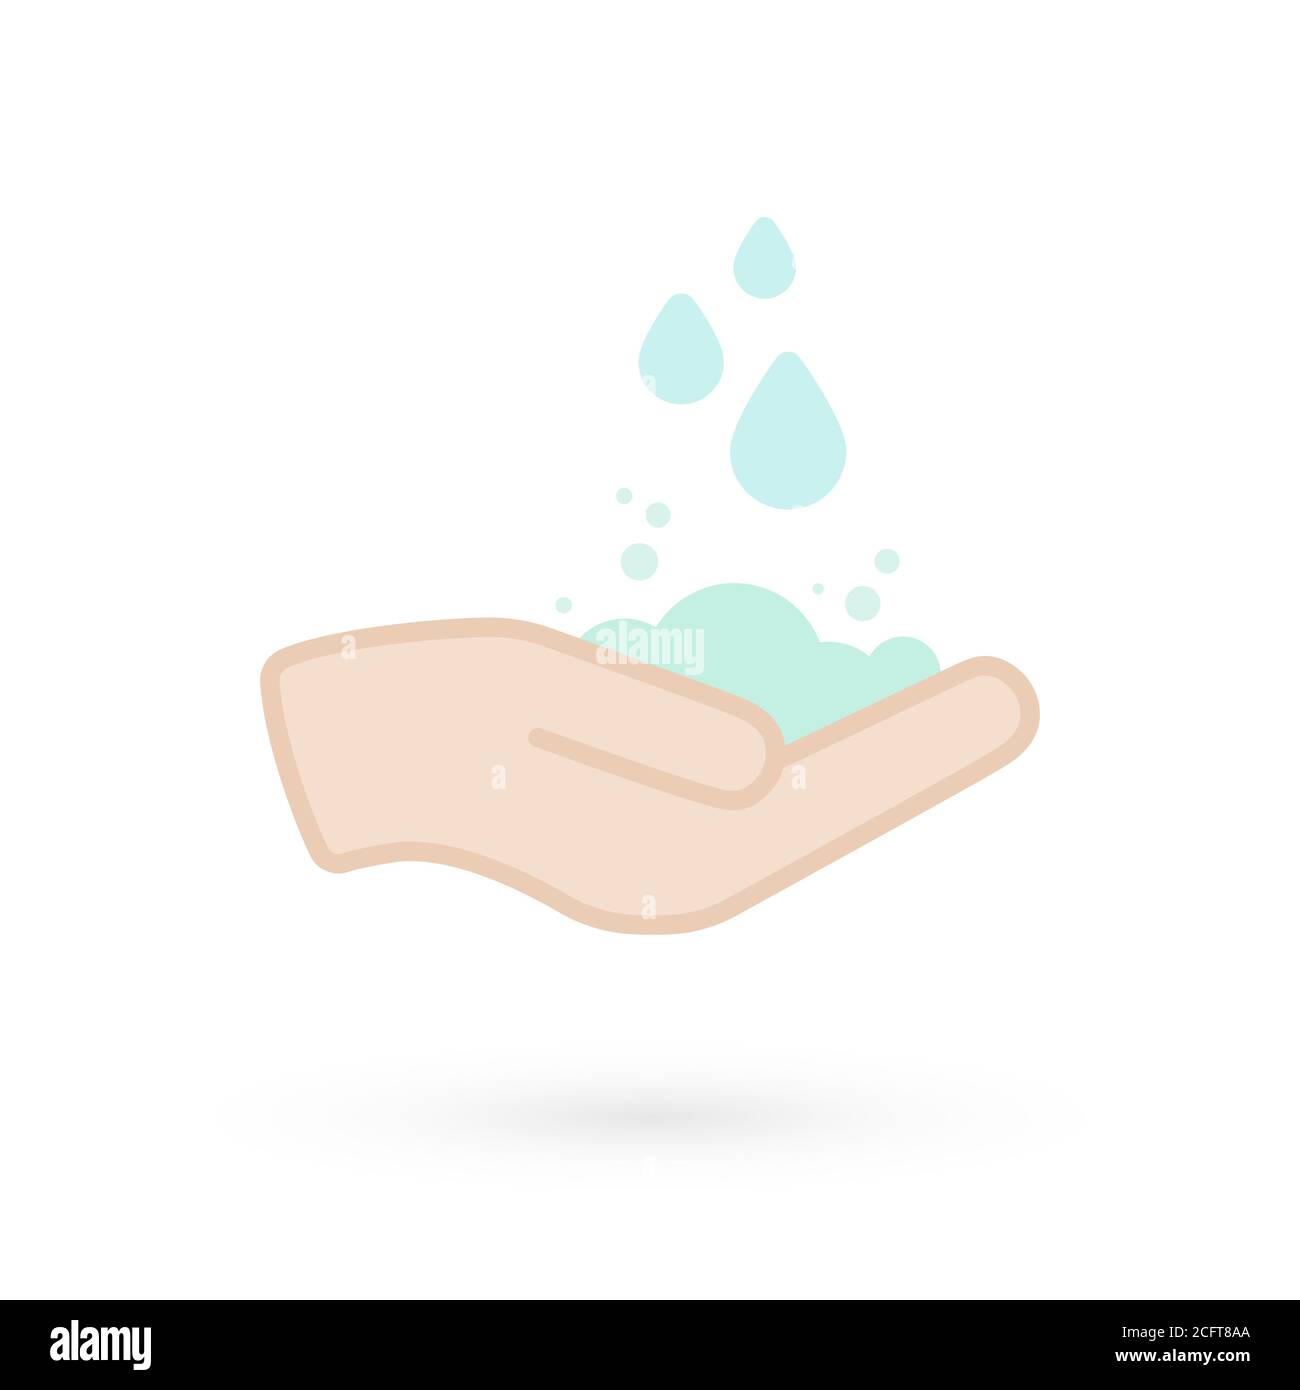 Hand washing icon. Hand with water and soap symbol. Prevention against viruses, bacteria, flu, coronavirus. Concept of hygiene, cleanliness, disinfect Stock Vector